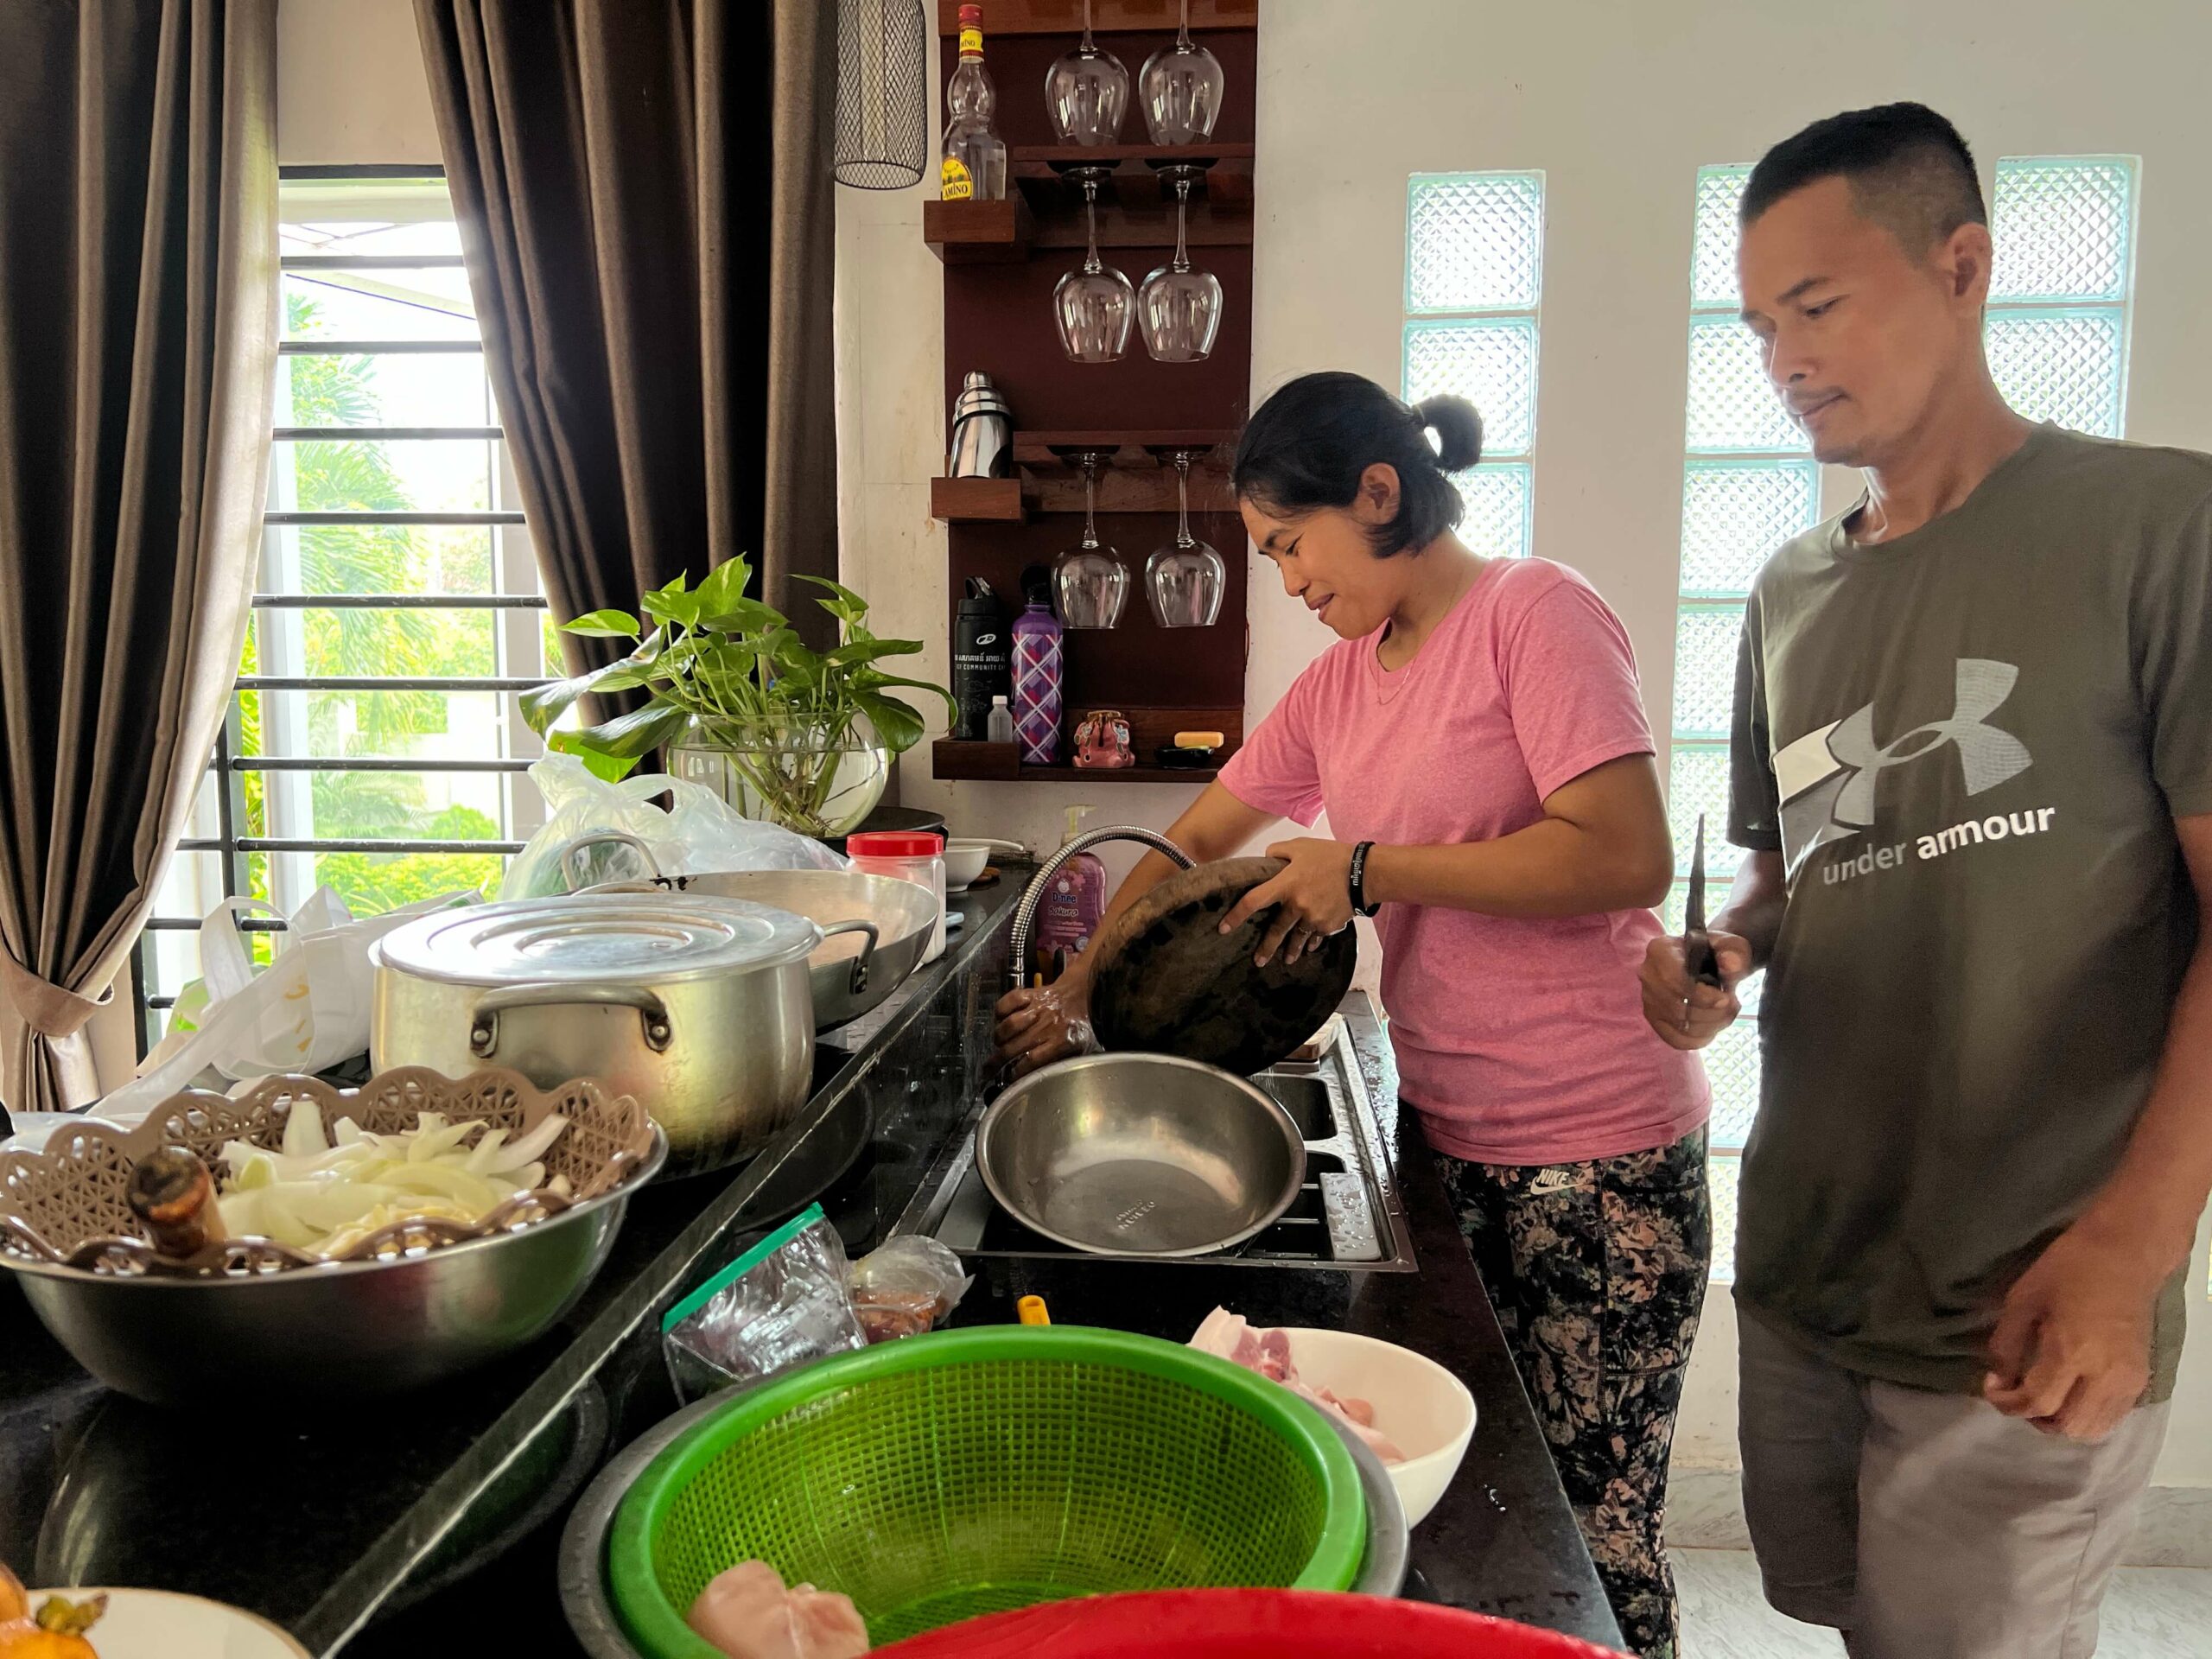 Join Dary and Hum Choeurn for a cooking class in their home in Siem Reap